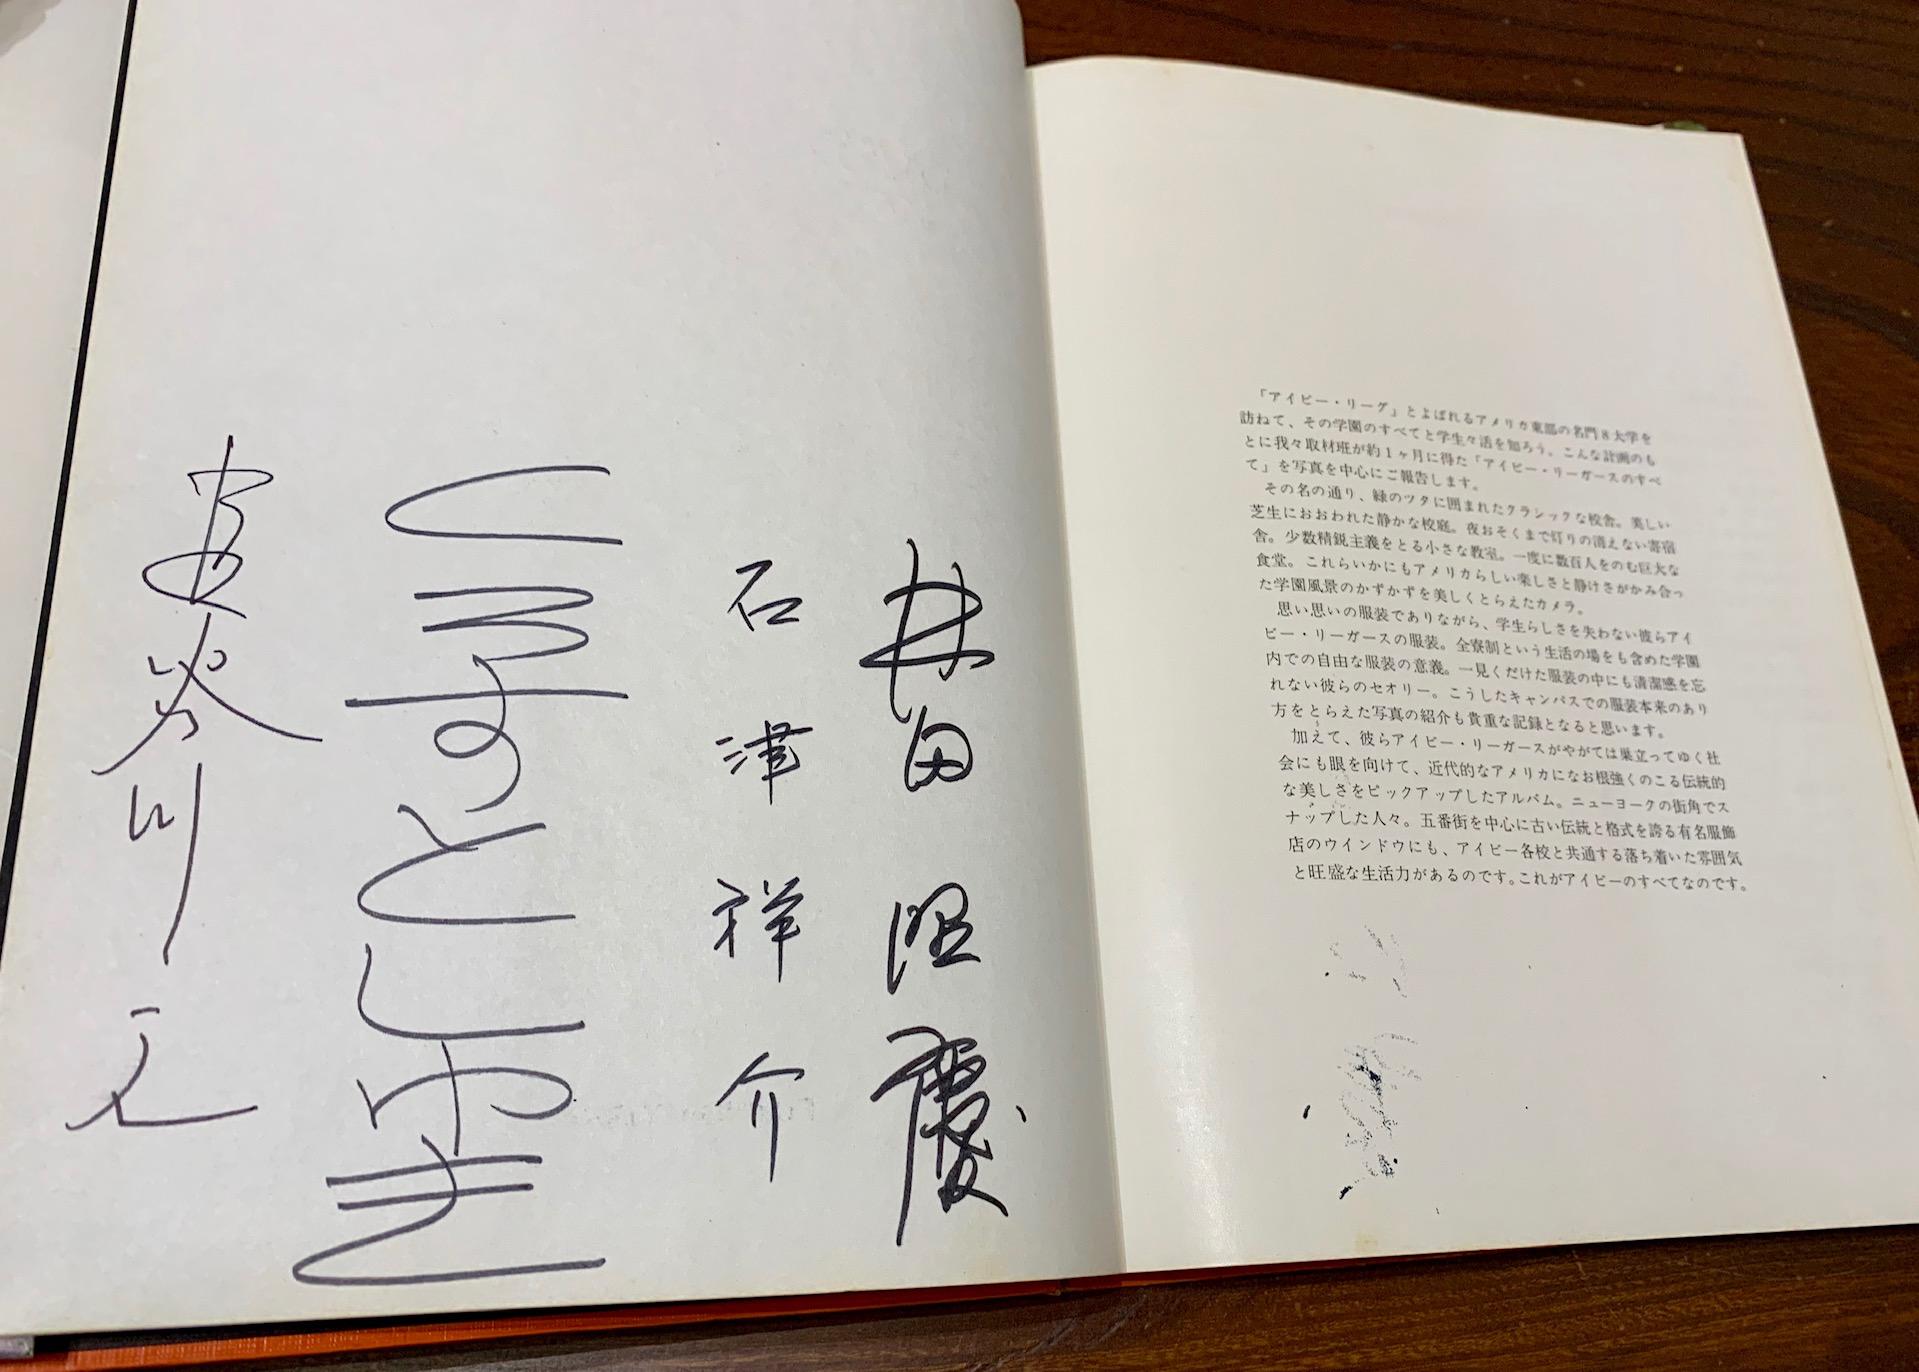 Take Ivy (1965 edition, signed by Teruyoshi 